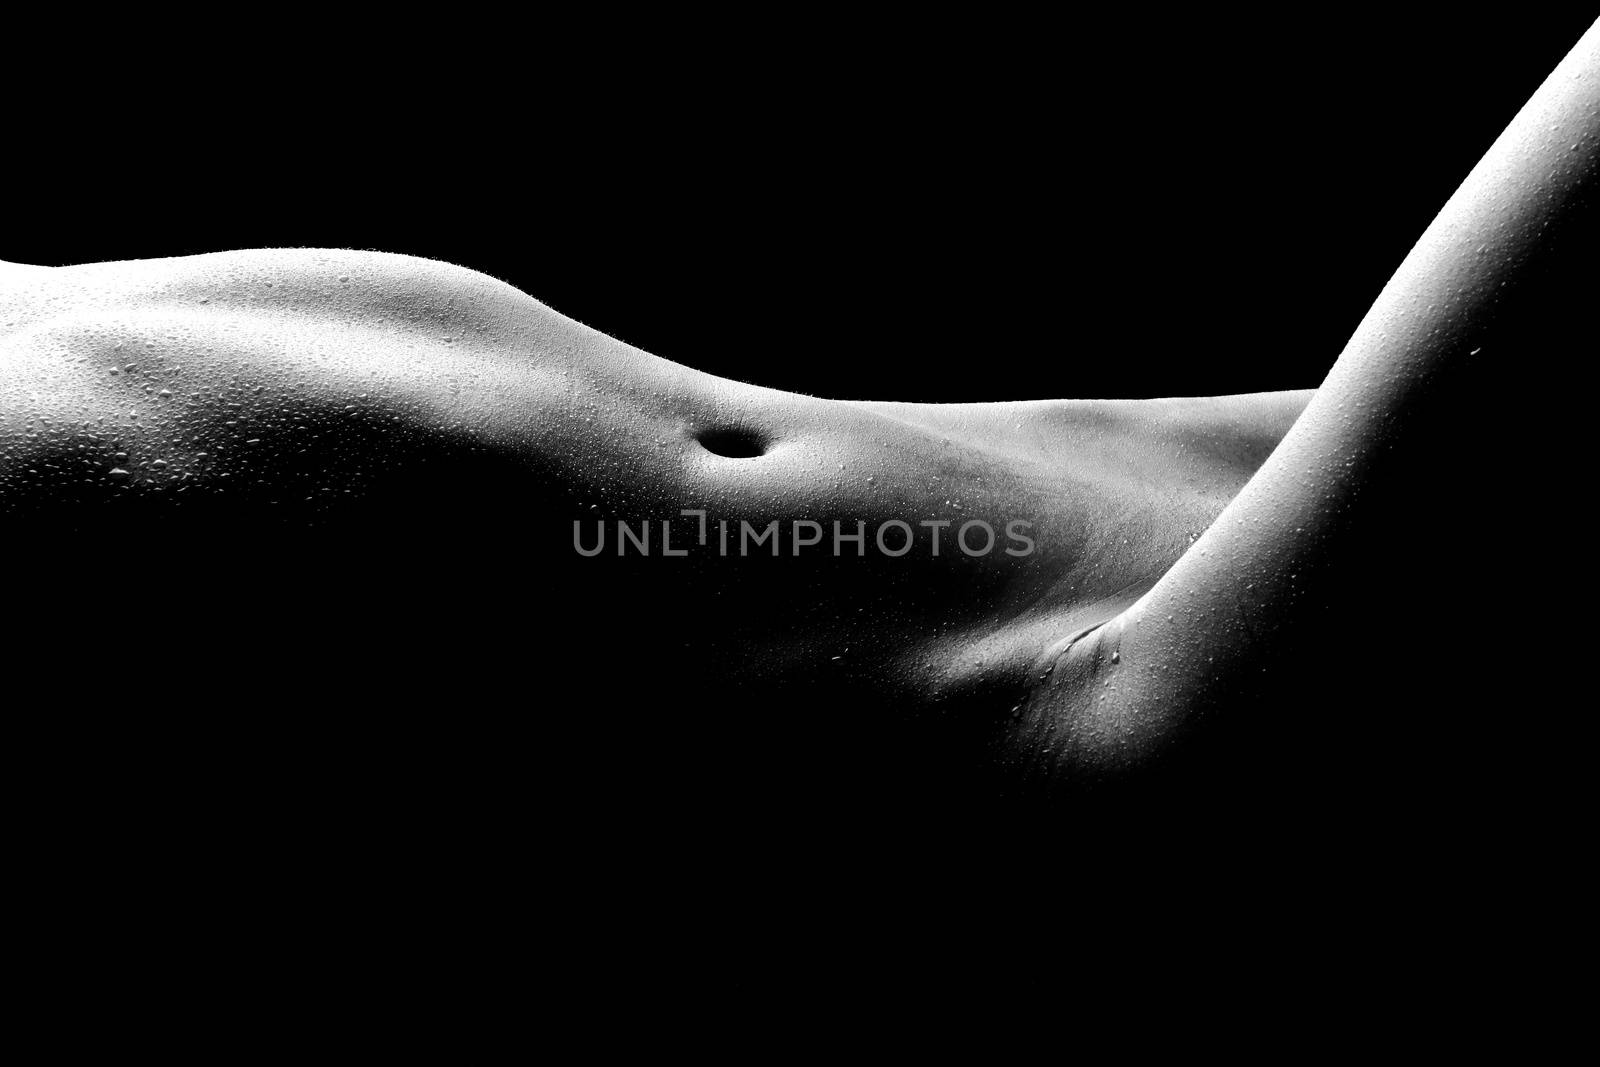 Nude Bodyscape Images of a Woman by tobkatrina